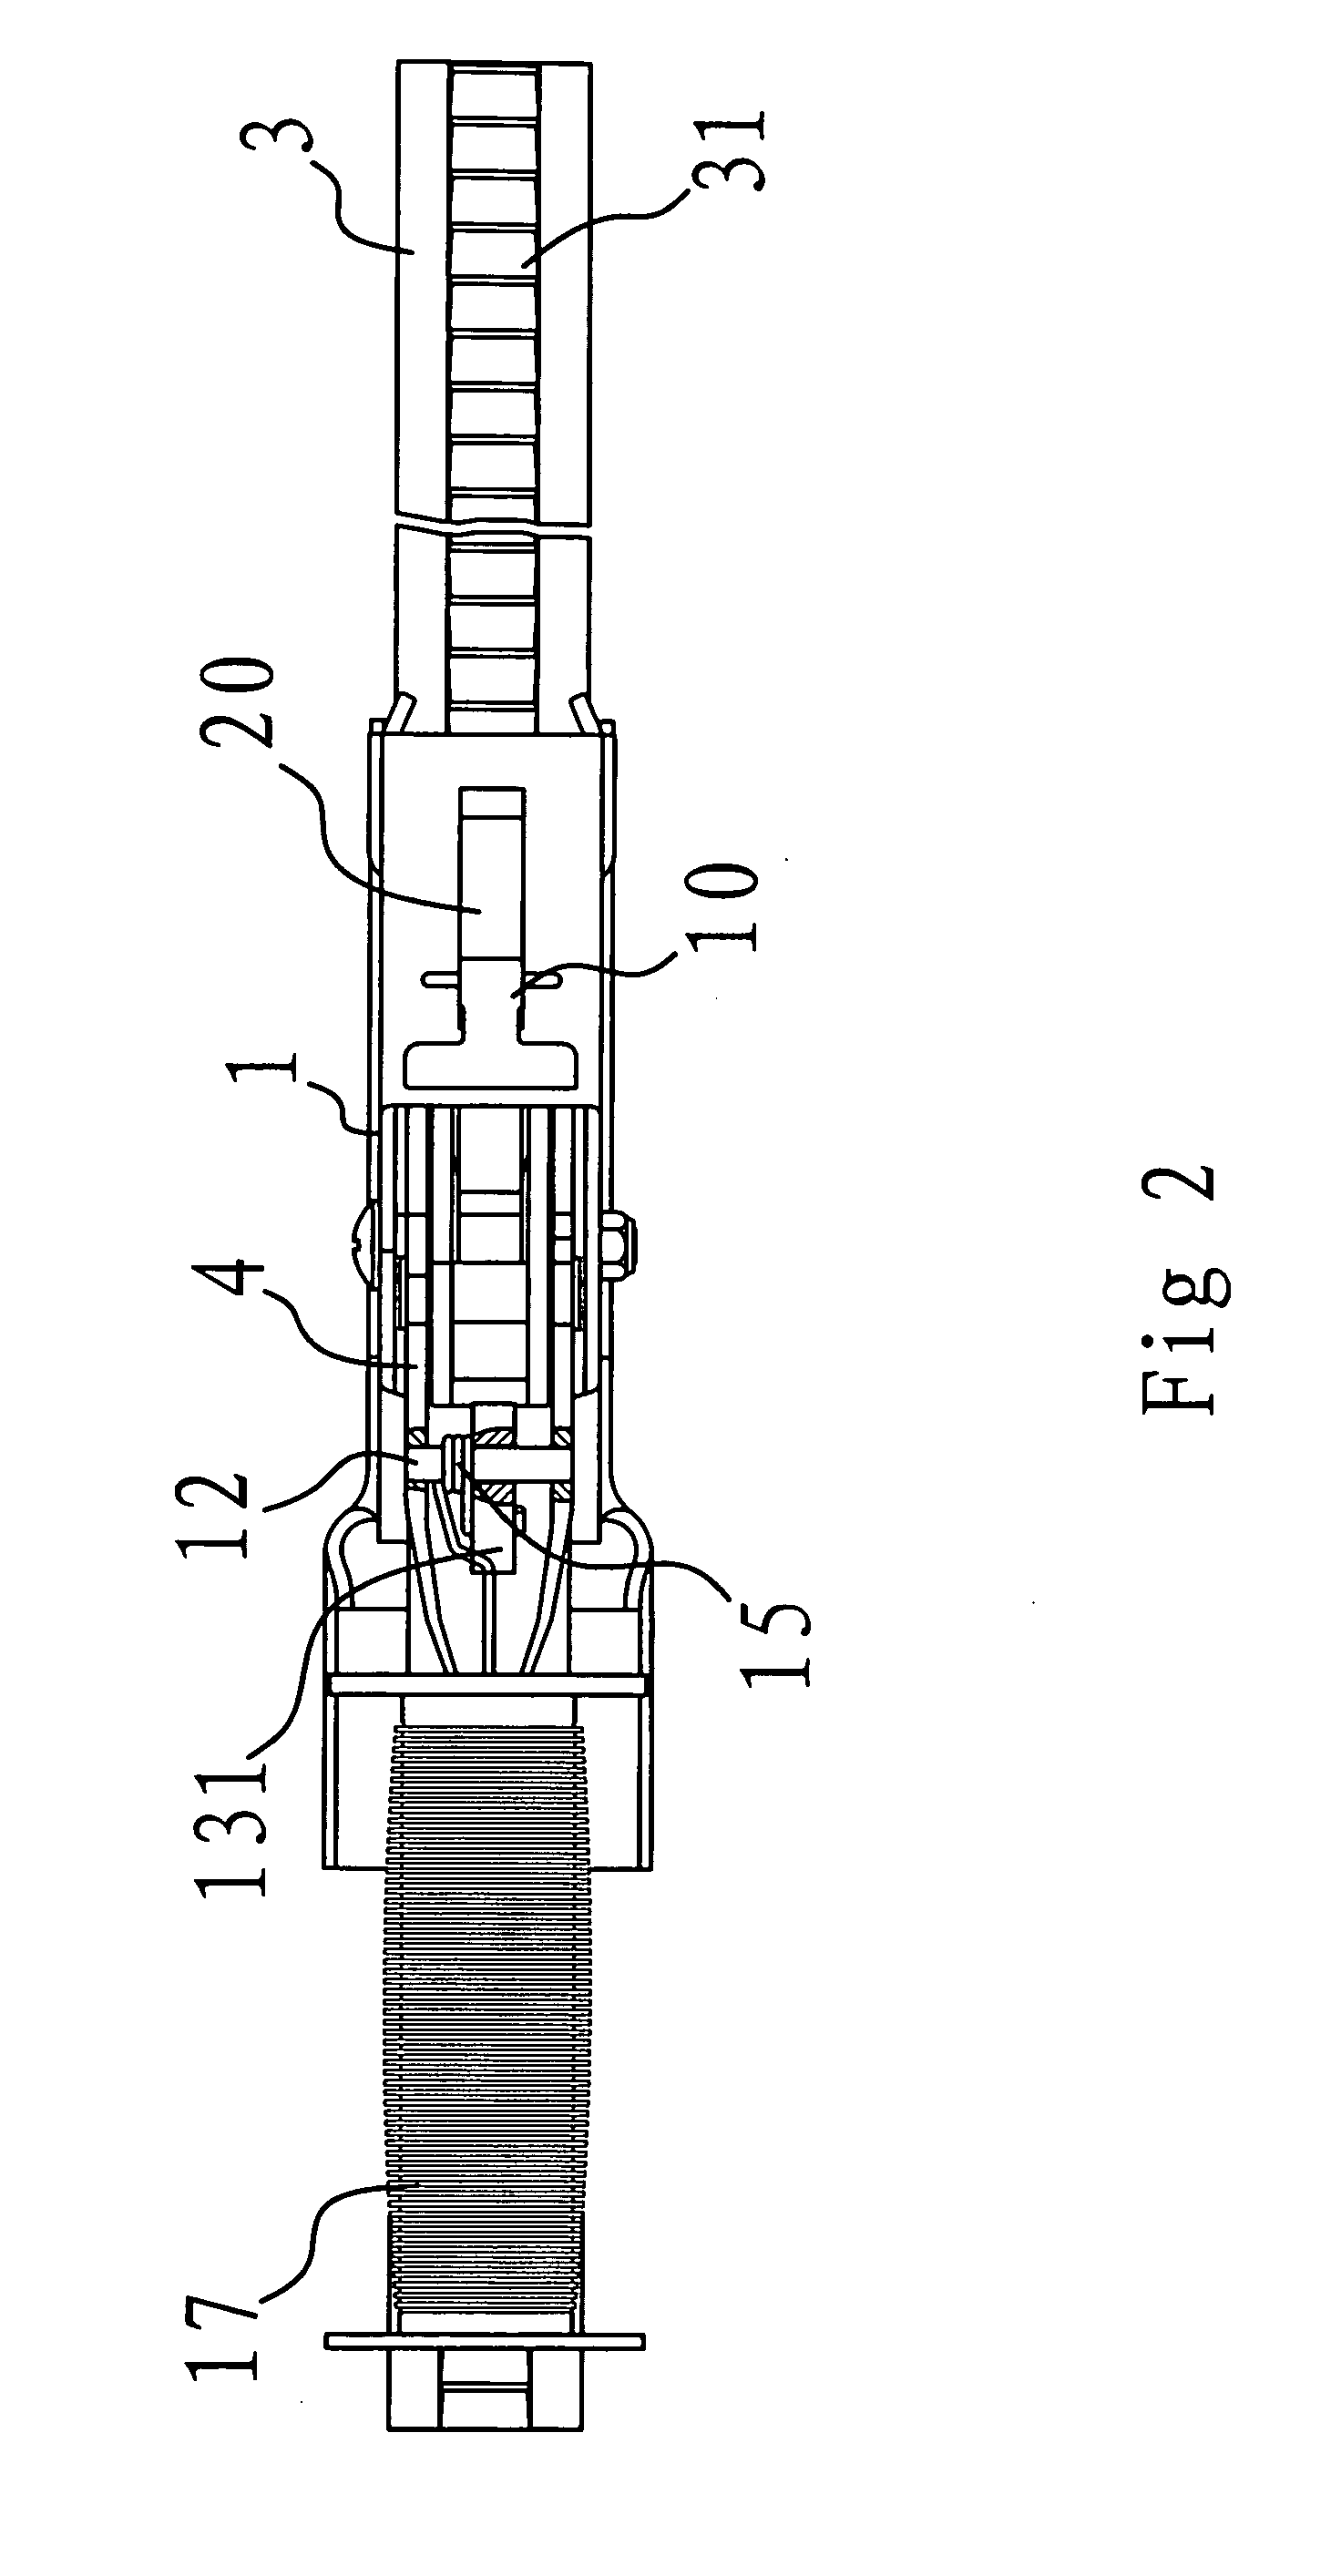 Goods fastening apparatus with improved structures